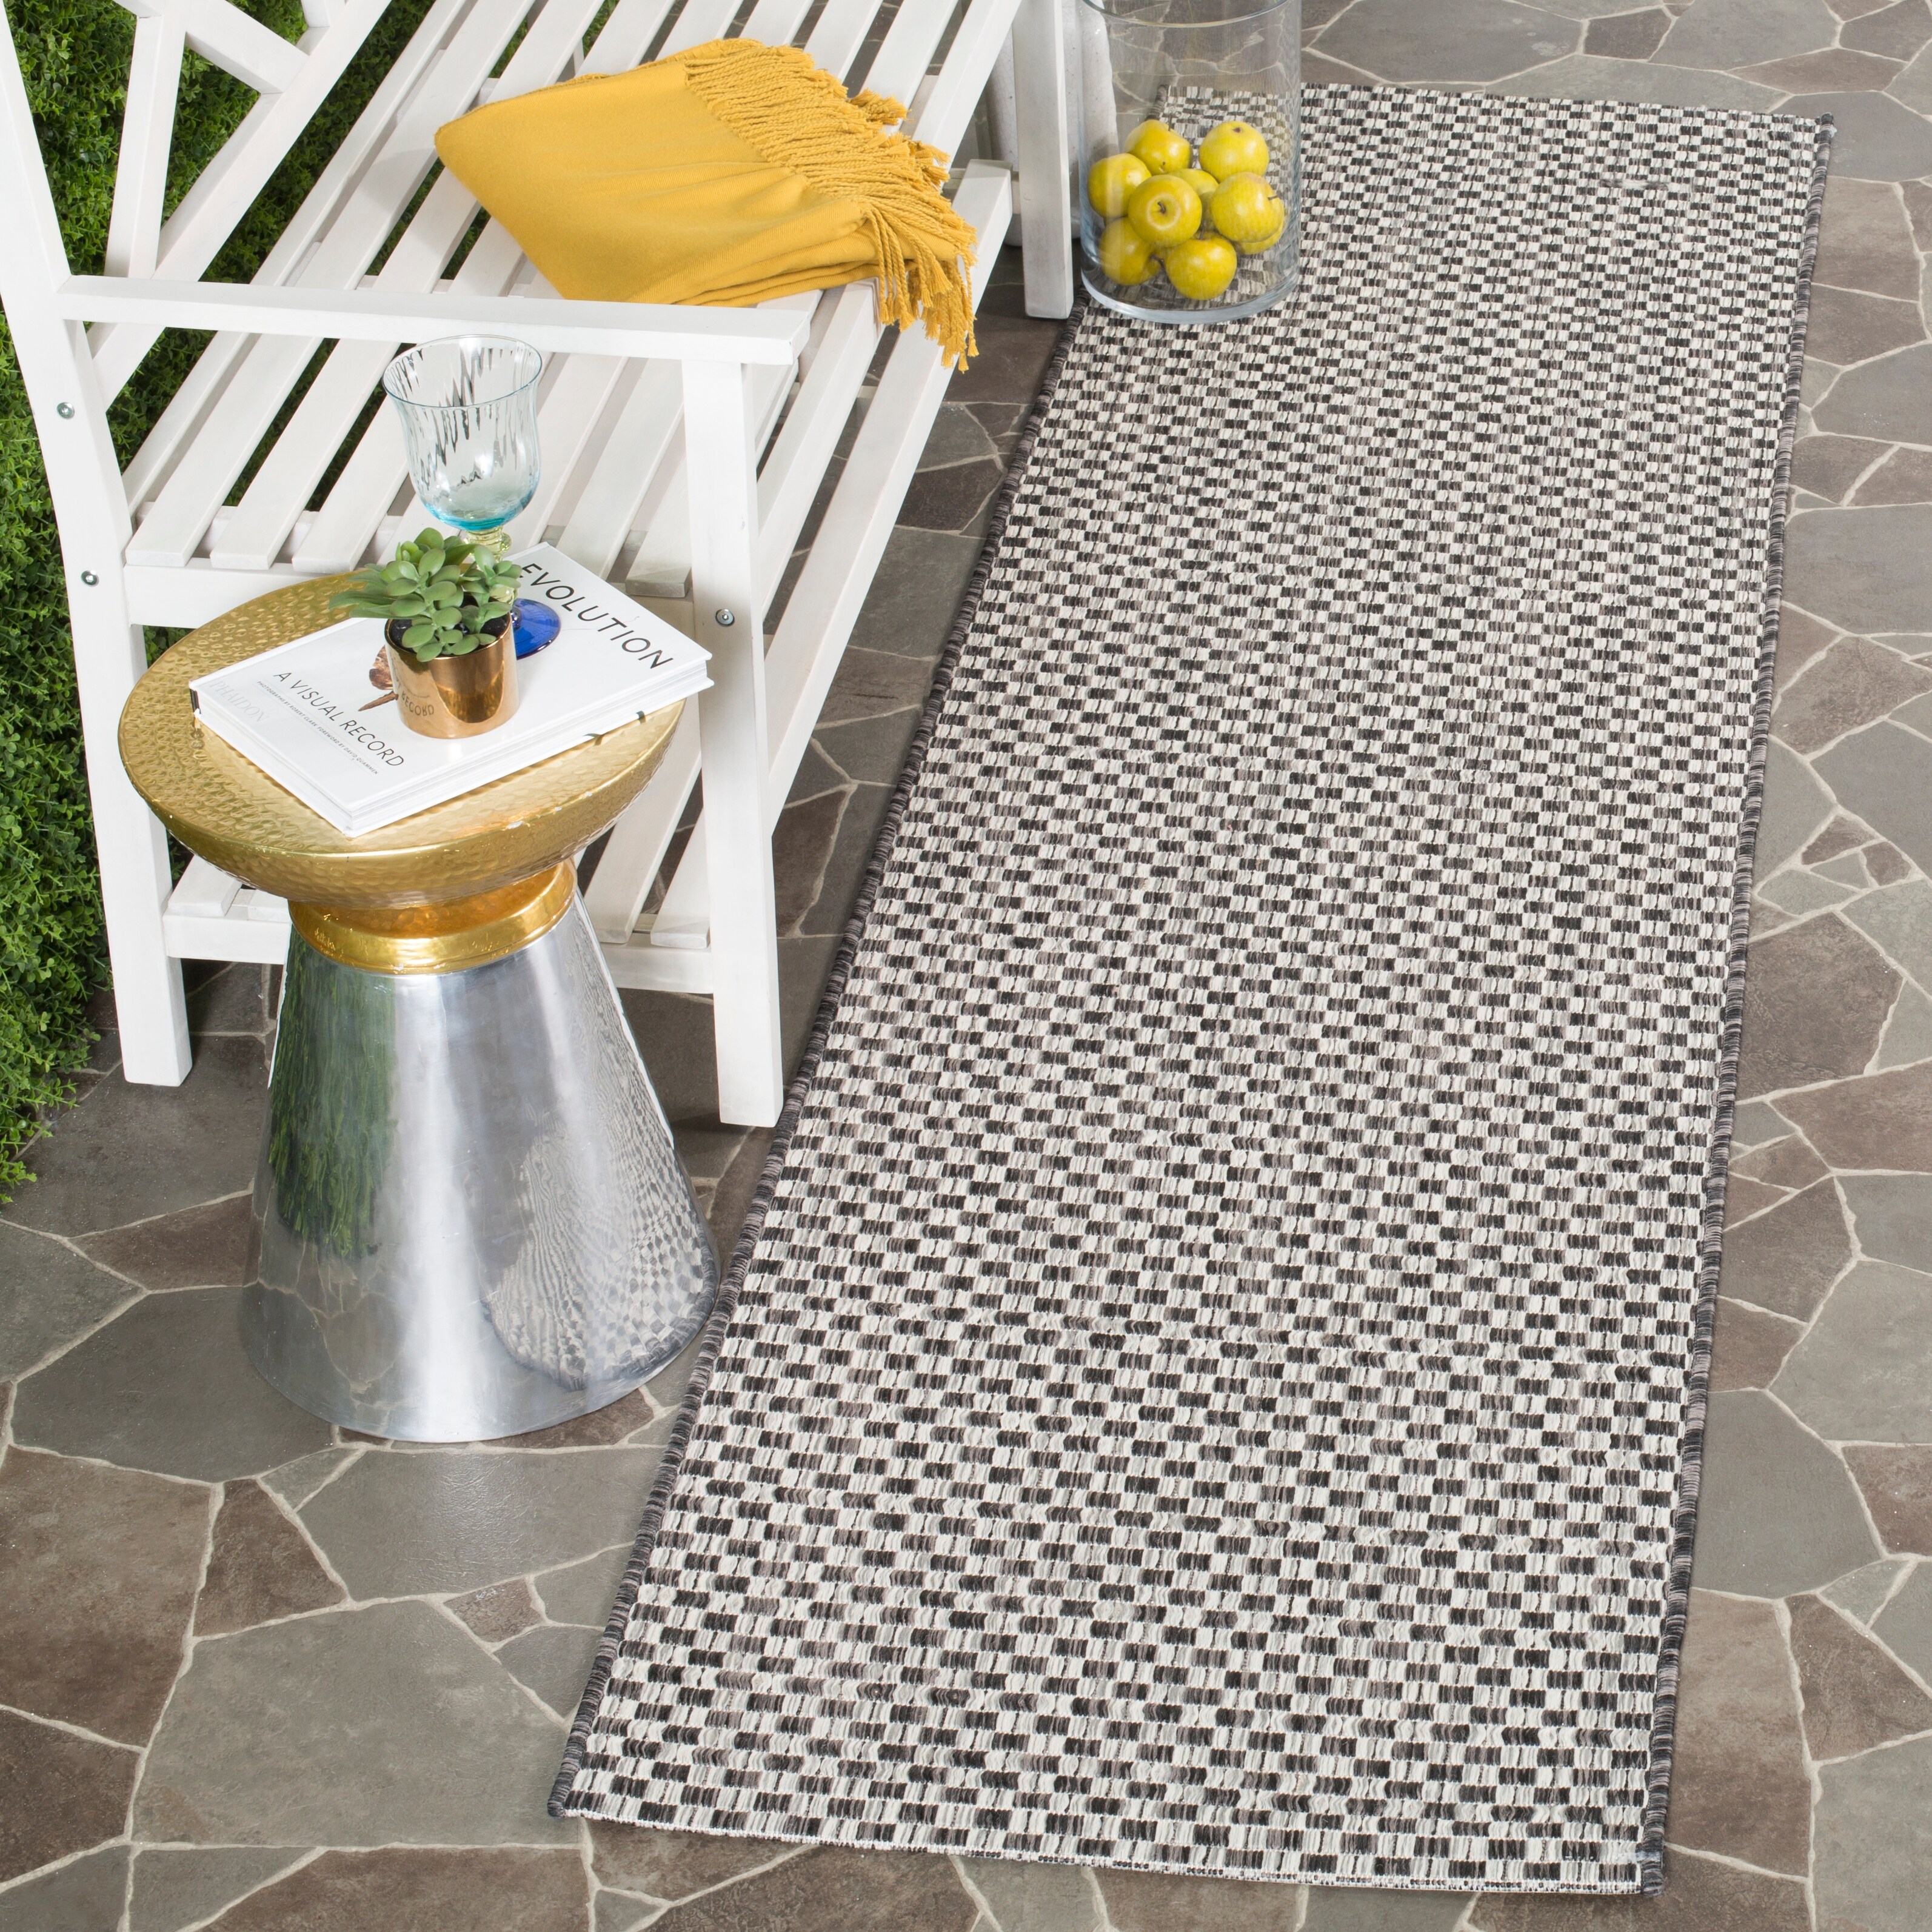  SAFAVIEH Courtyard Collection 2'7 x 5' Brown/Bone CY6914  Trellis Indoor/ Outside Waterproof Easy cleansingPatio Backyard Mudroom  Area Mat : Home & Kitchen